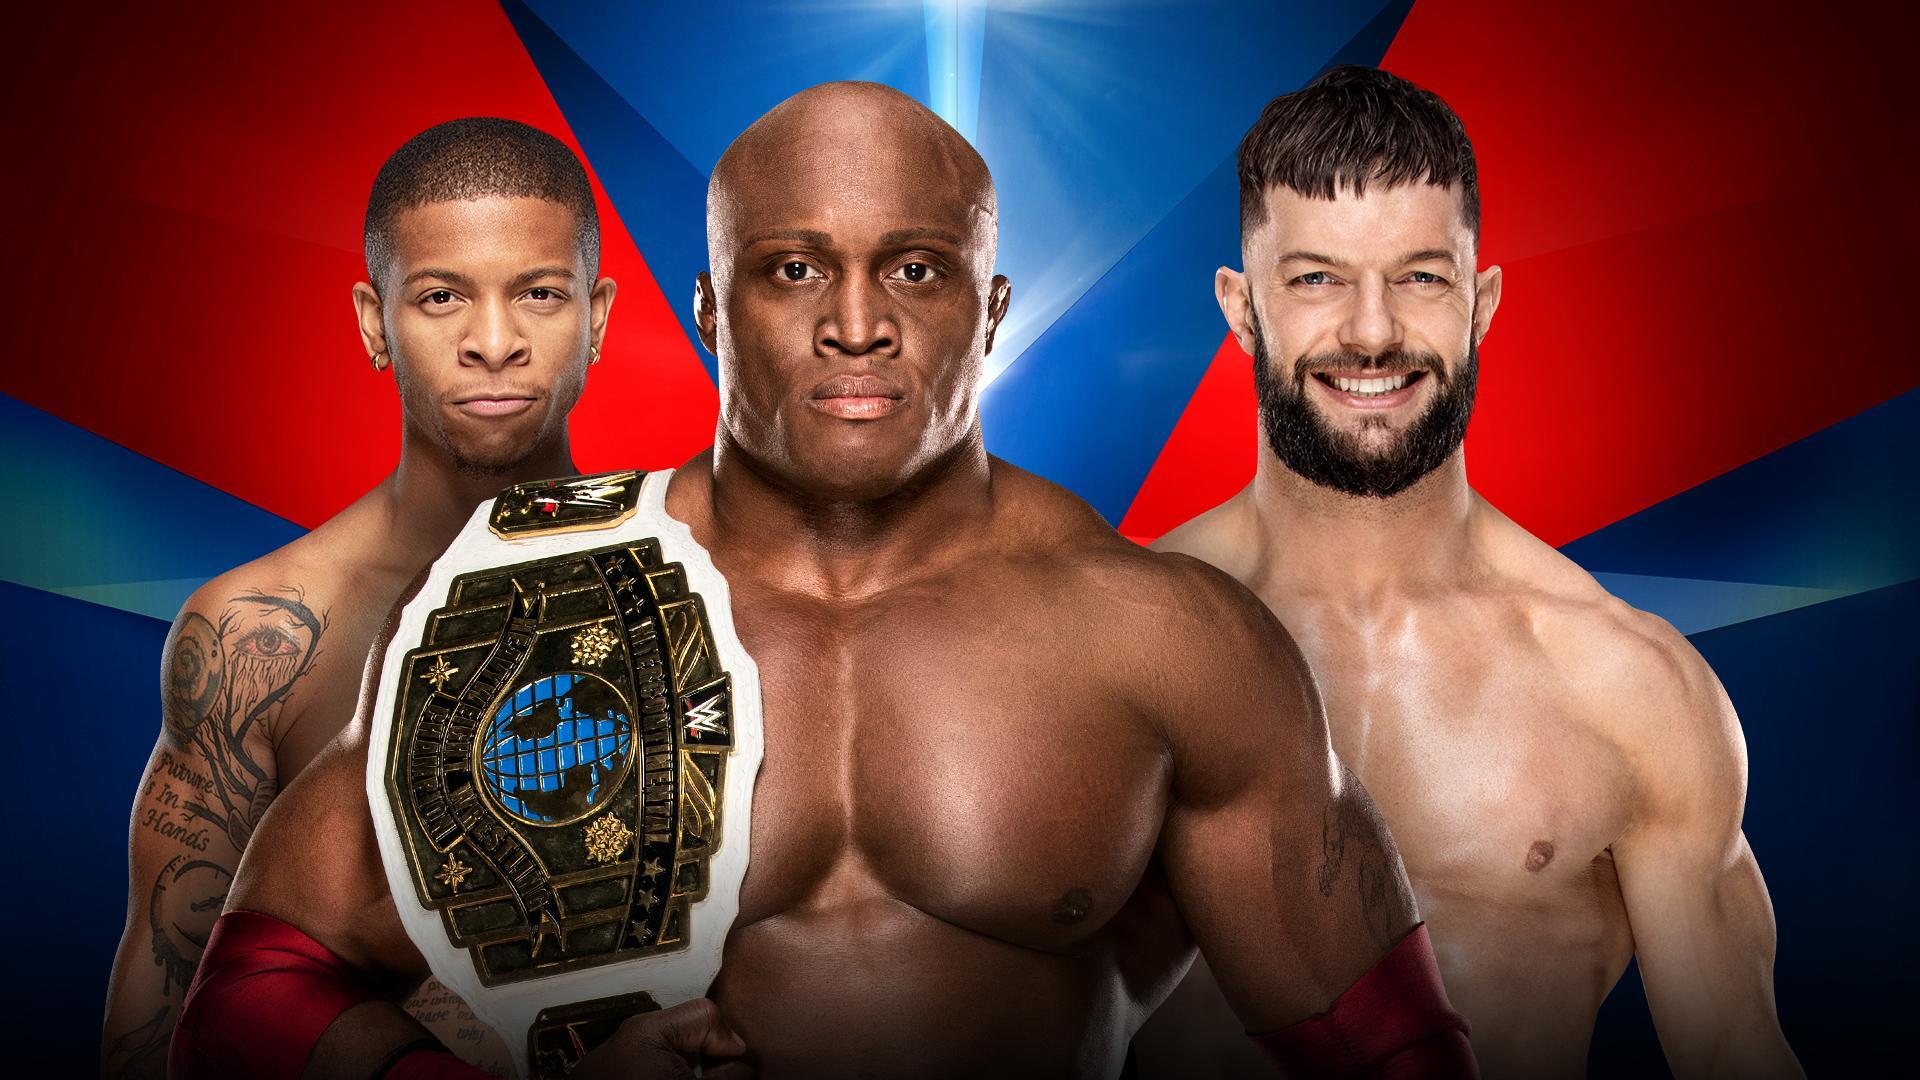 IC title match, Strowman vs. Corbin set for WWE Elimination Chamber